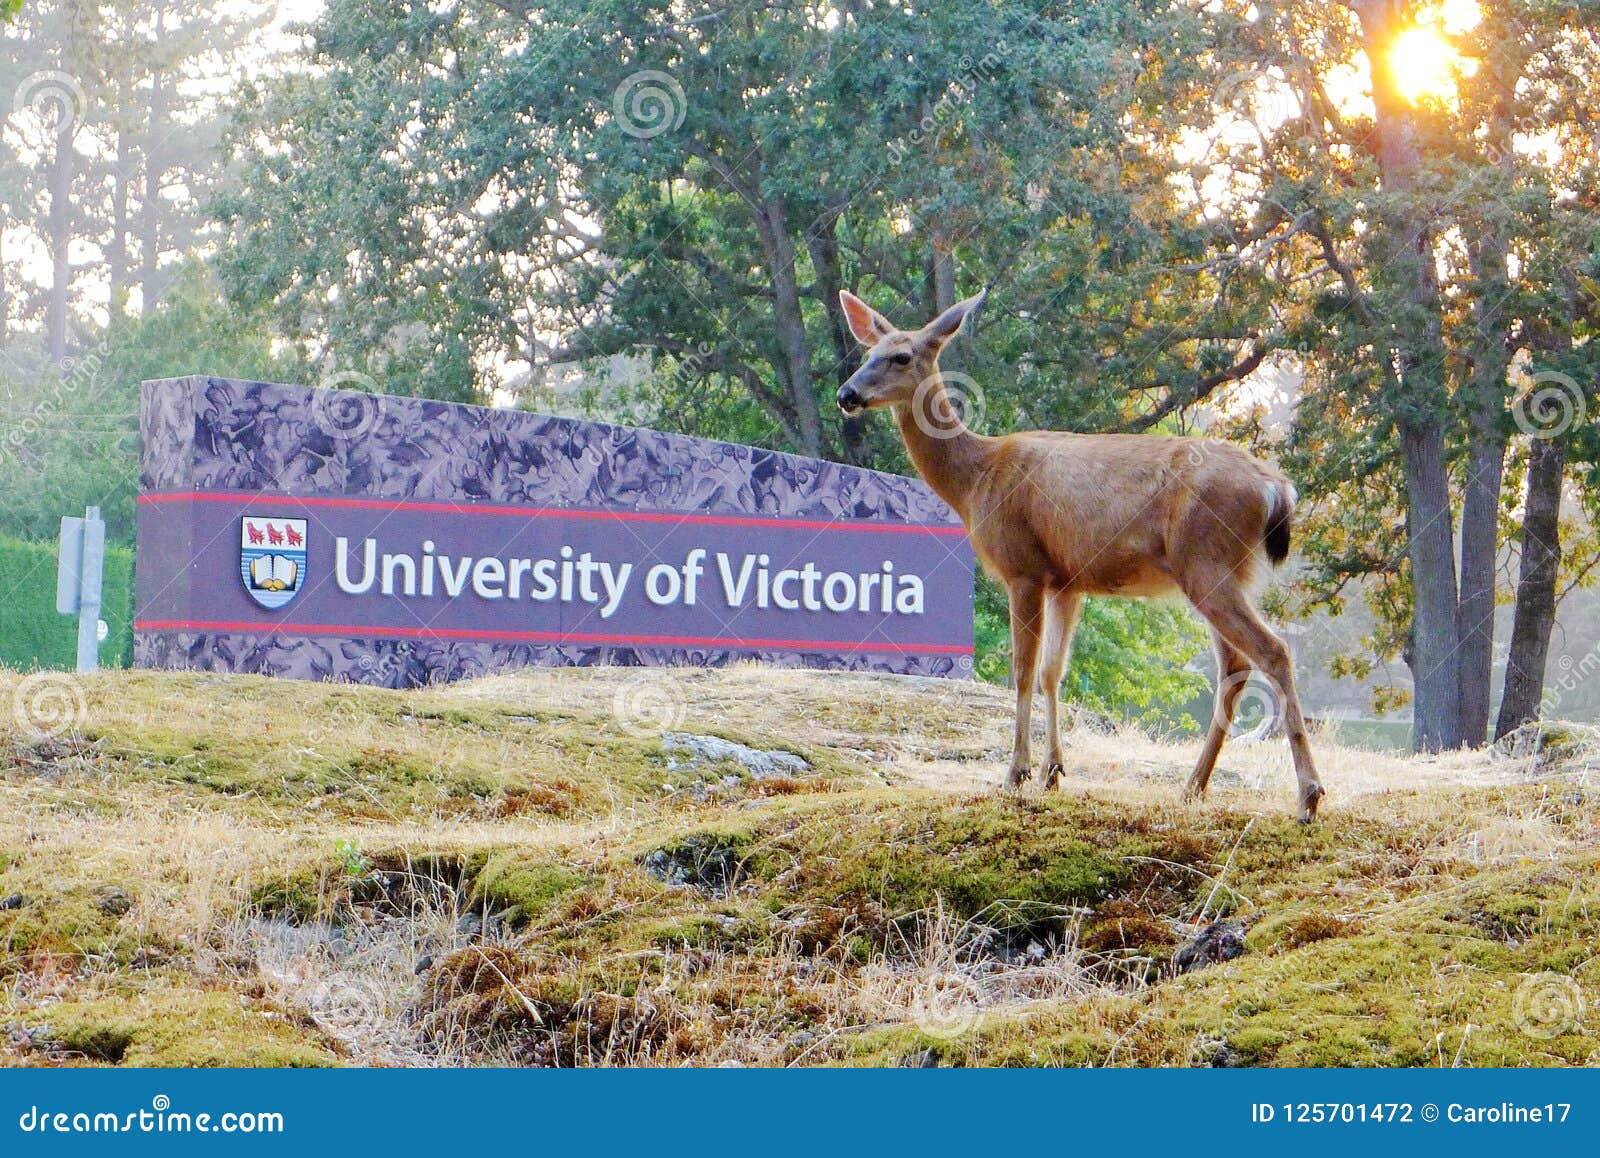 deer-victoria-university-there-many-streets-parks-bc-canada-125701472.jpg